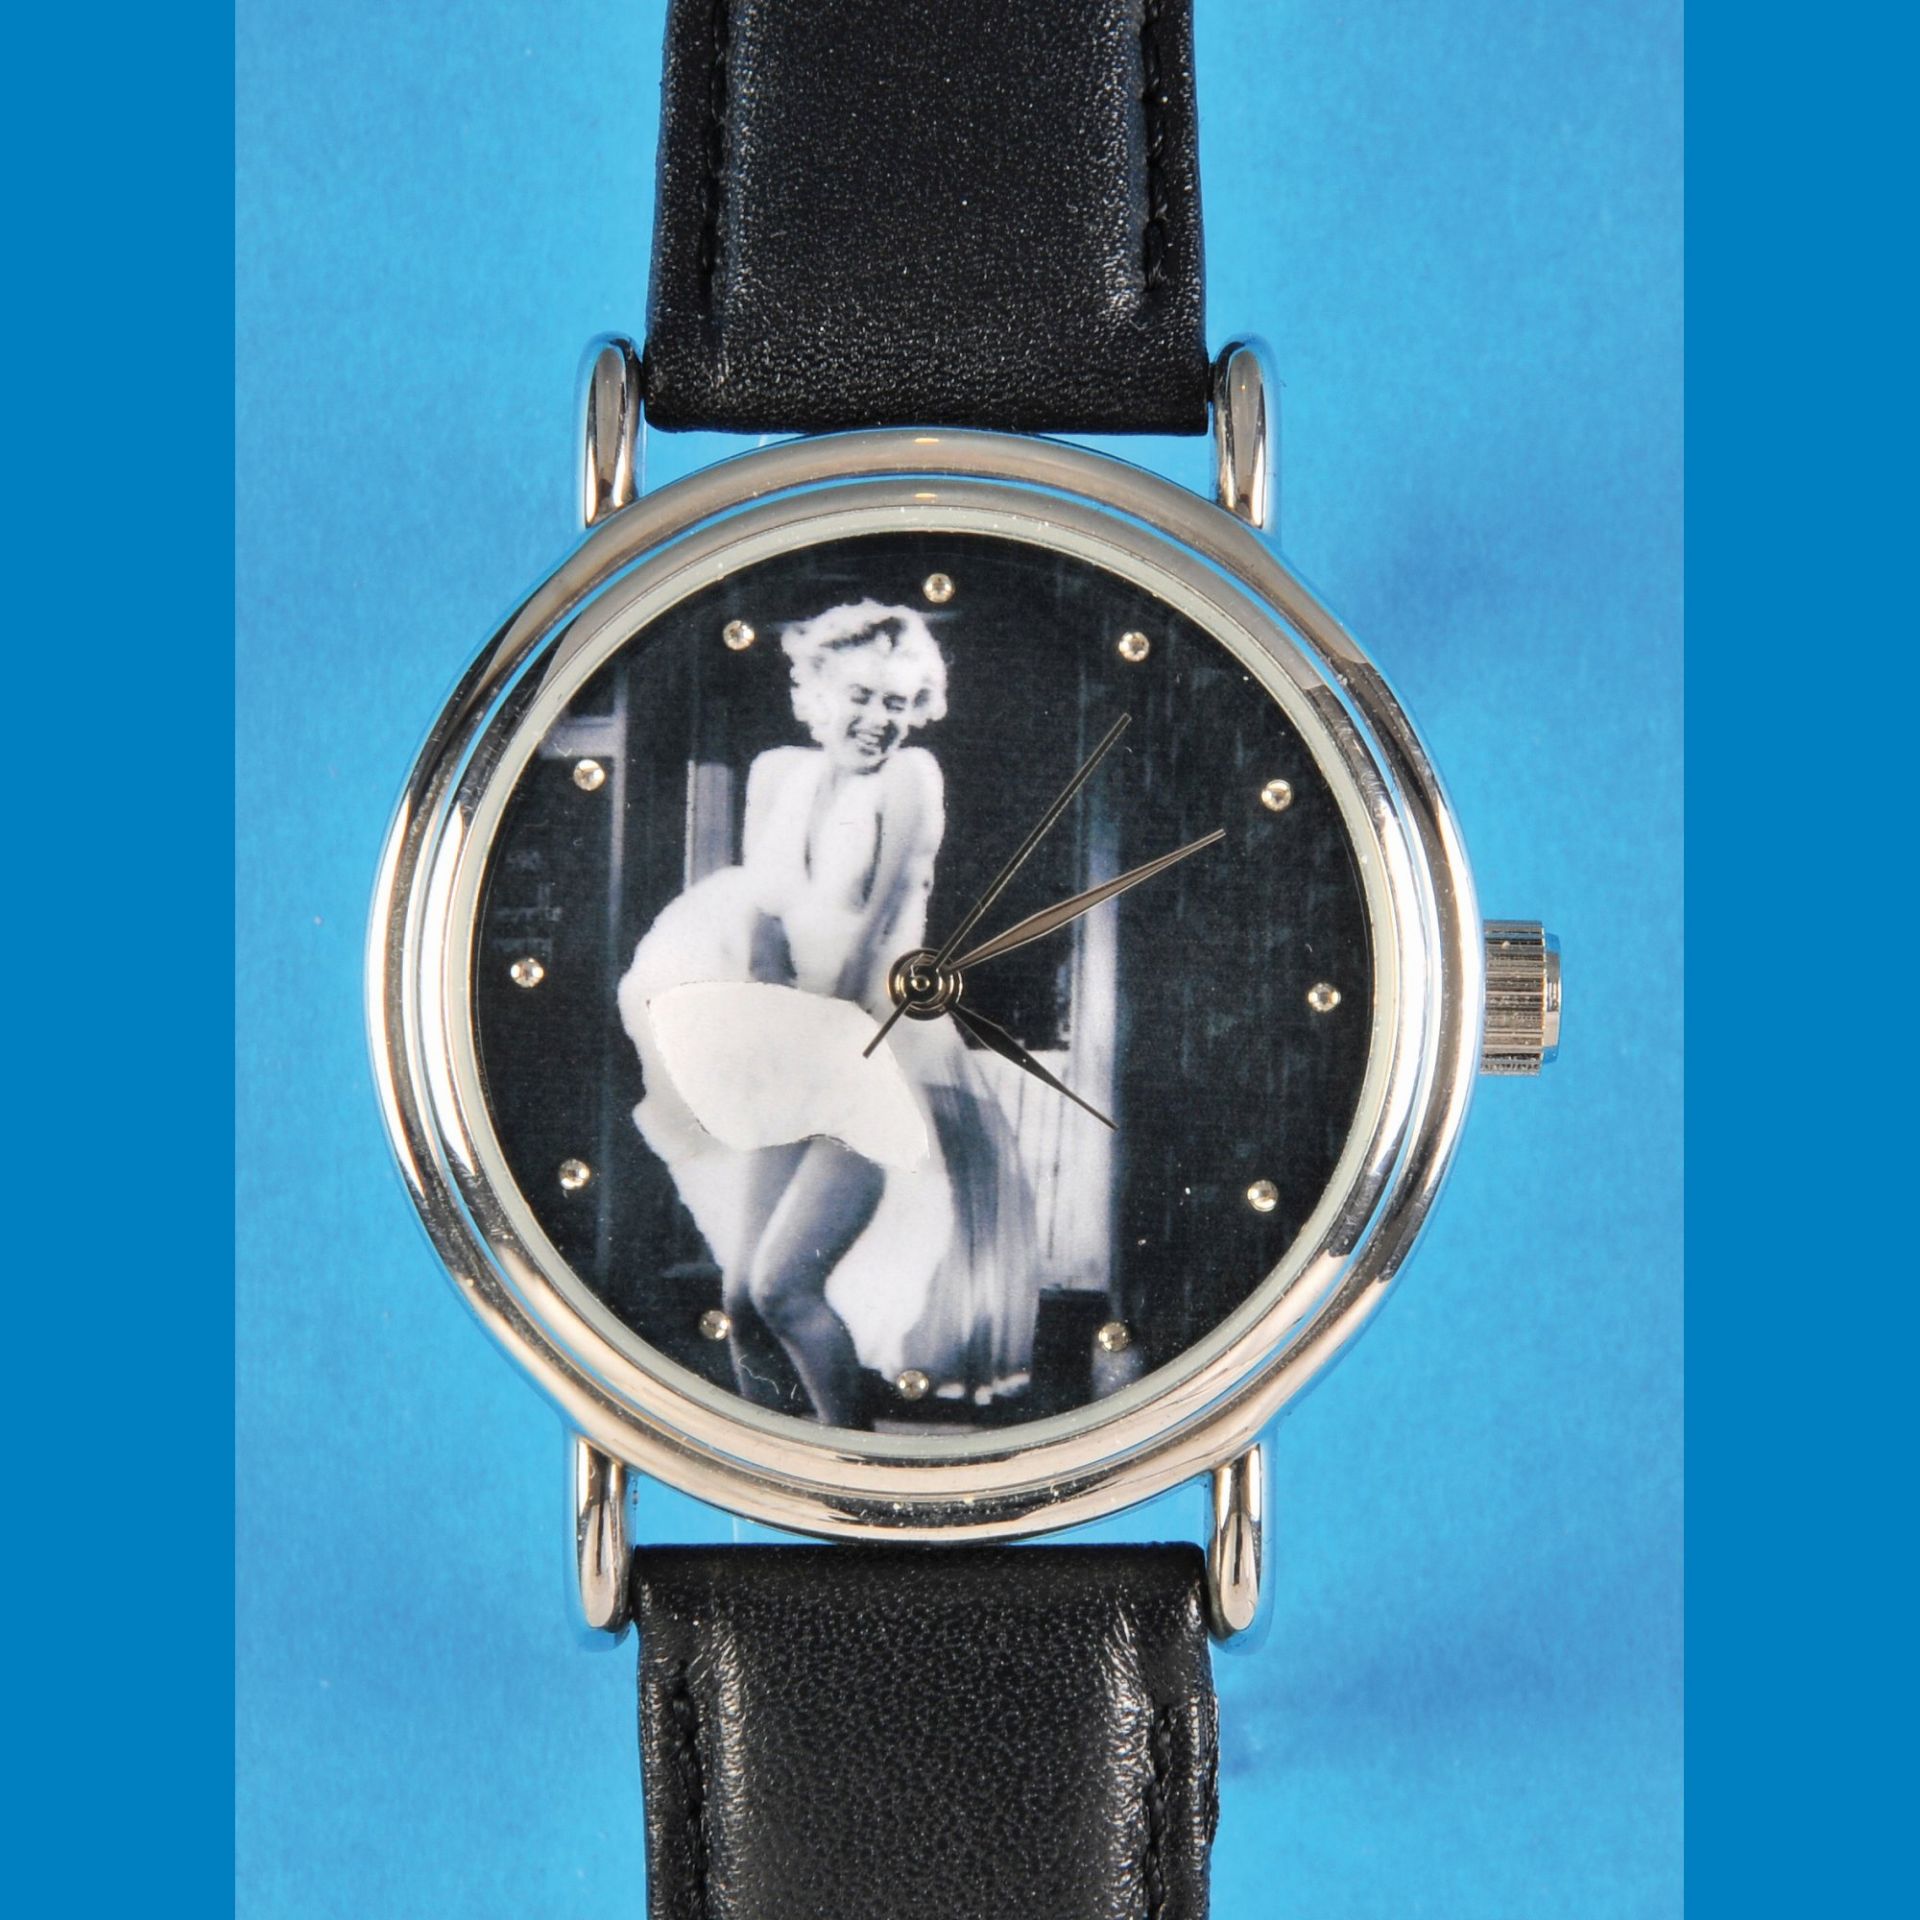 Steel wristwatch with automat and picture of Marilyn Monroe